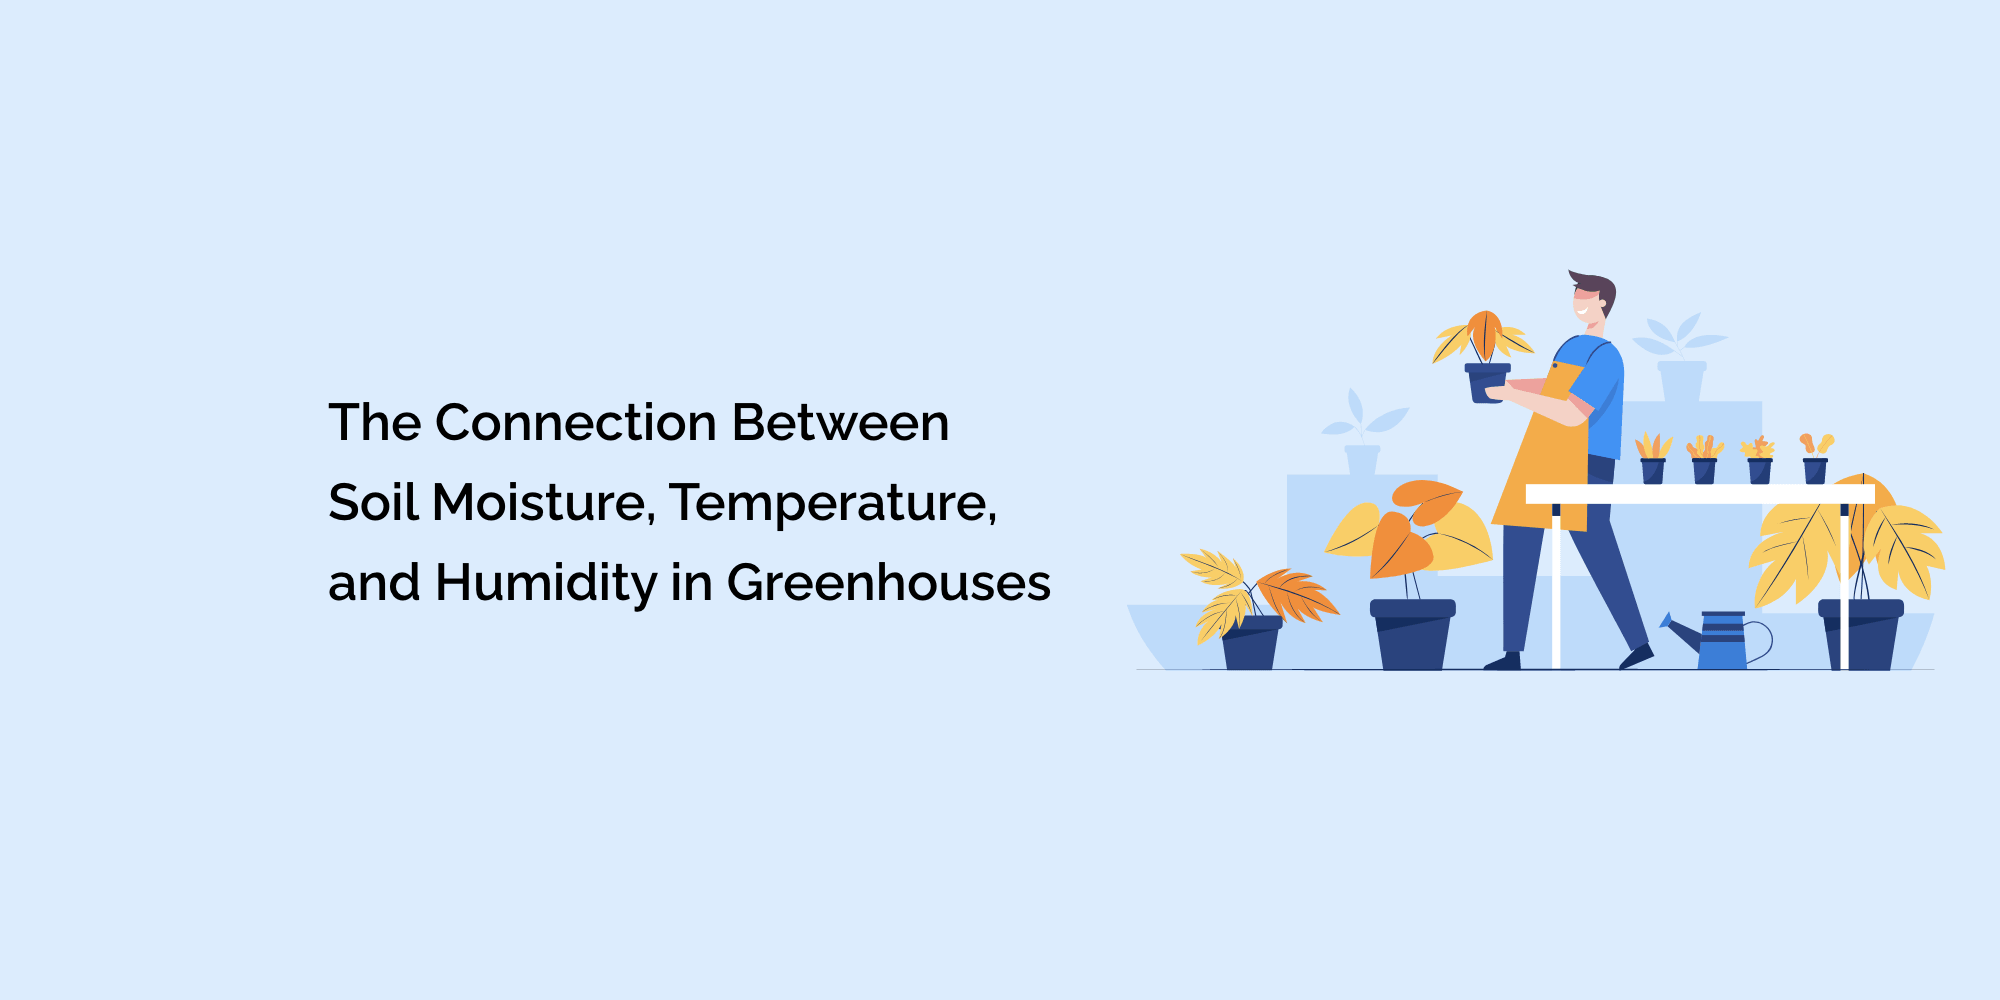 The Connection Between Soil Moisture, Temperature, and Humidity in Greenhouses